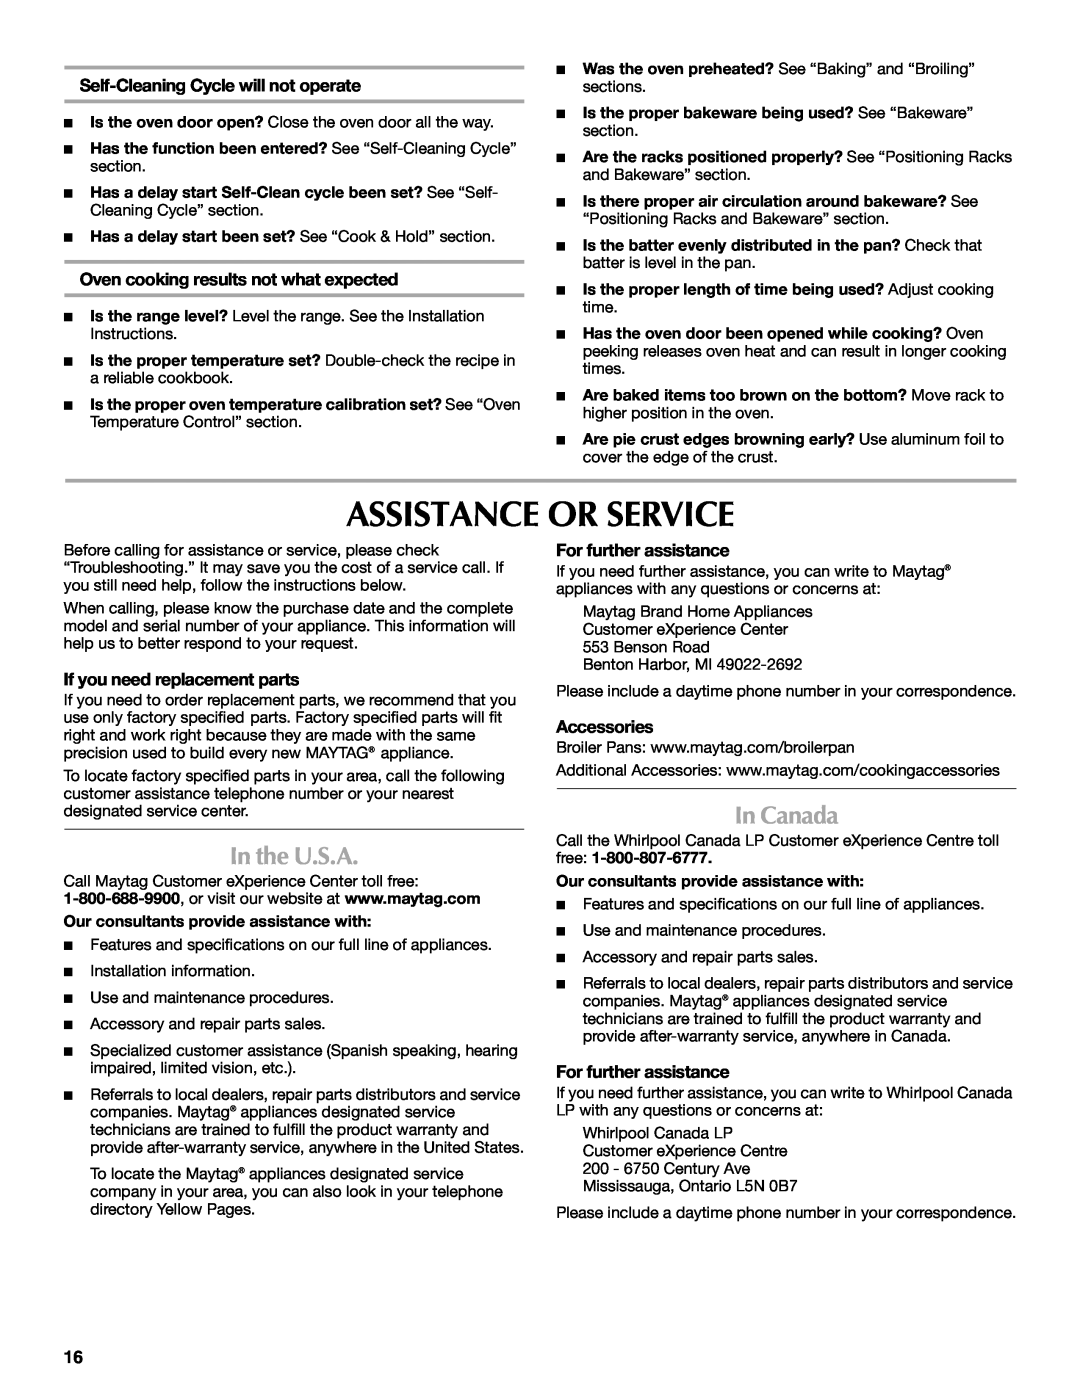 Maytag W10430917A manual Assistance Or Service, In the U.S.A, In Canada, Self-CleaningCycle will not operate, Accessories 